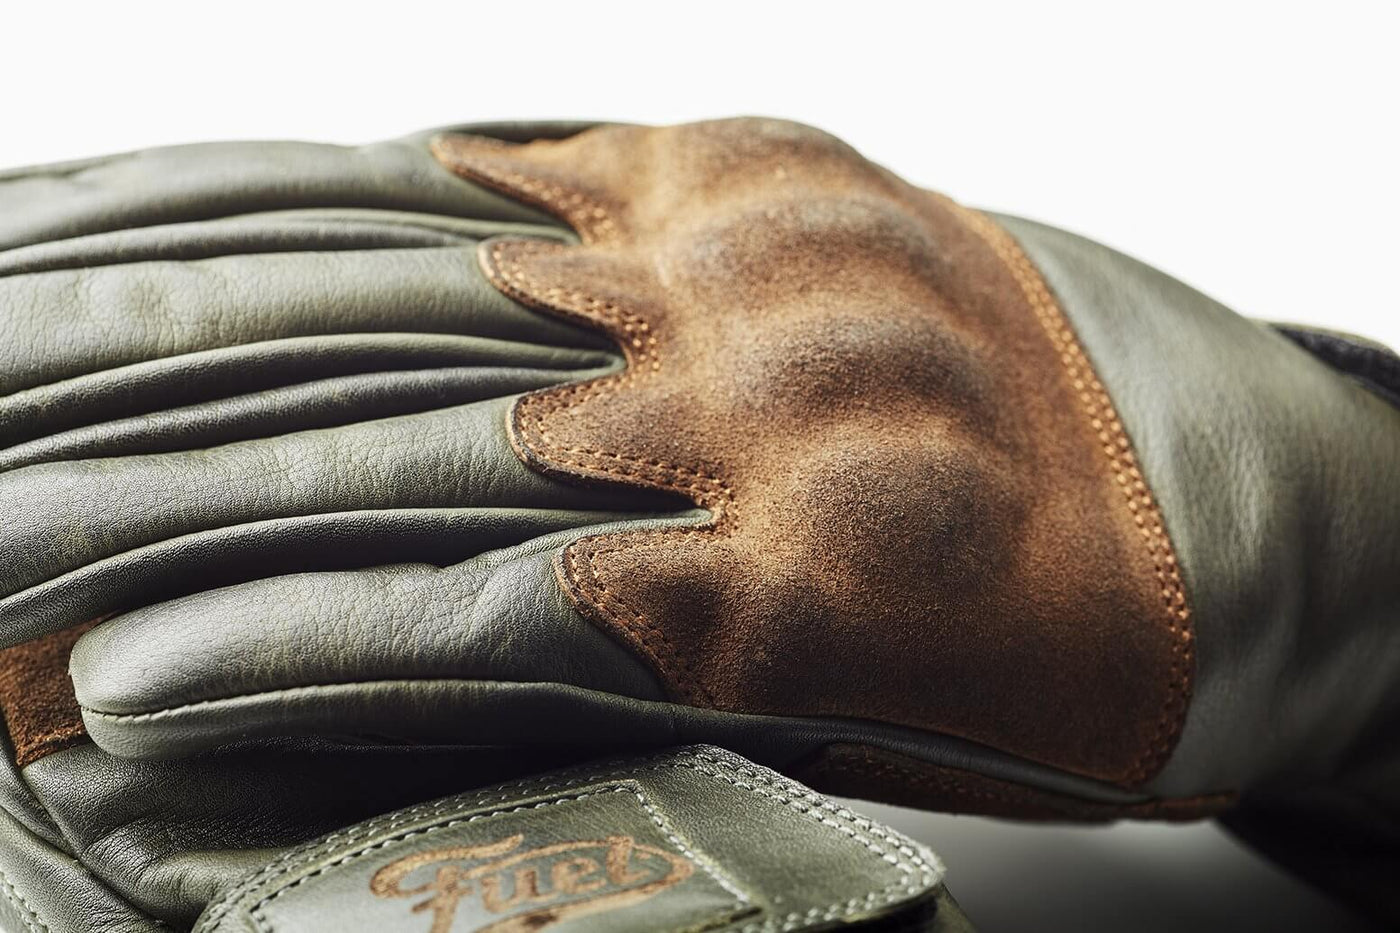 "RODEO" GLOVES OLIVE